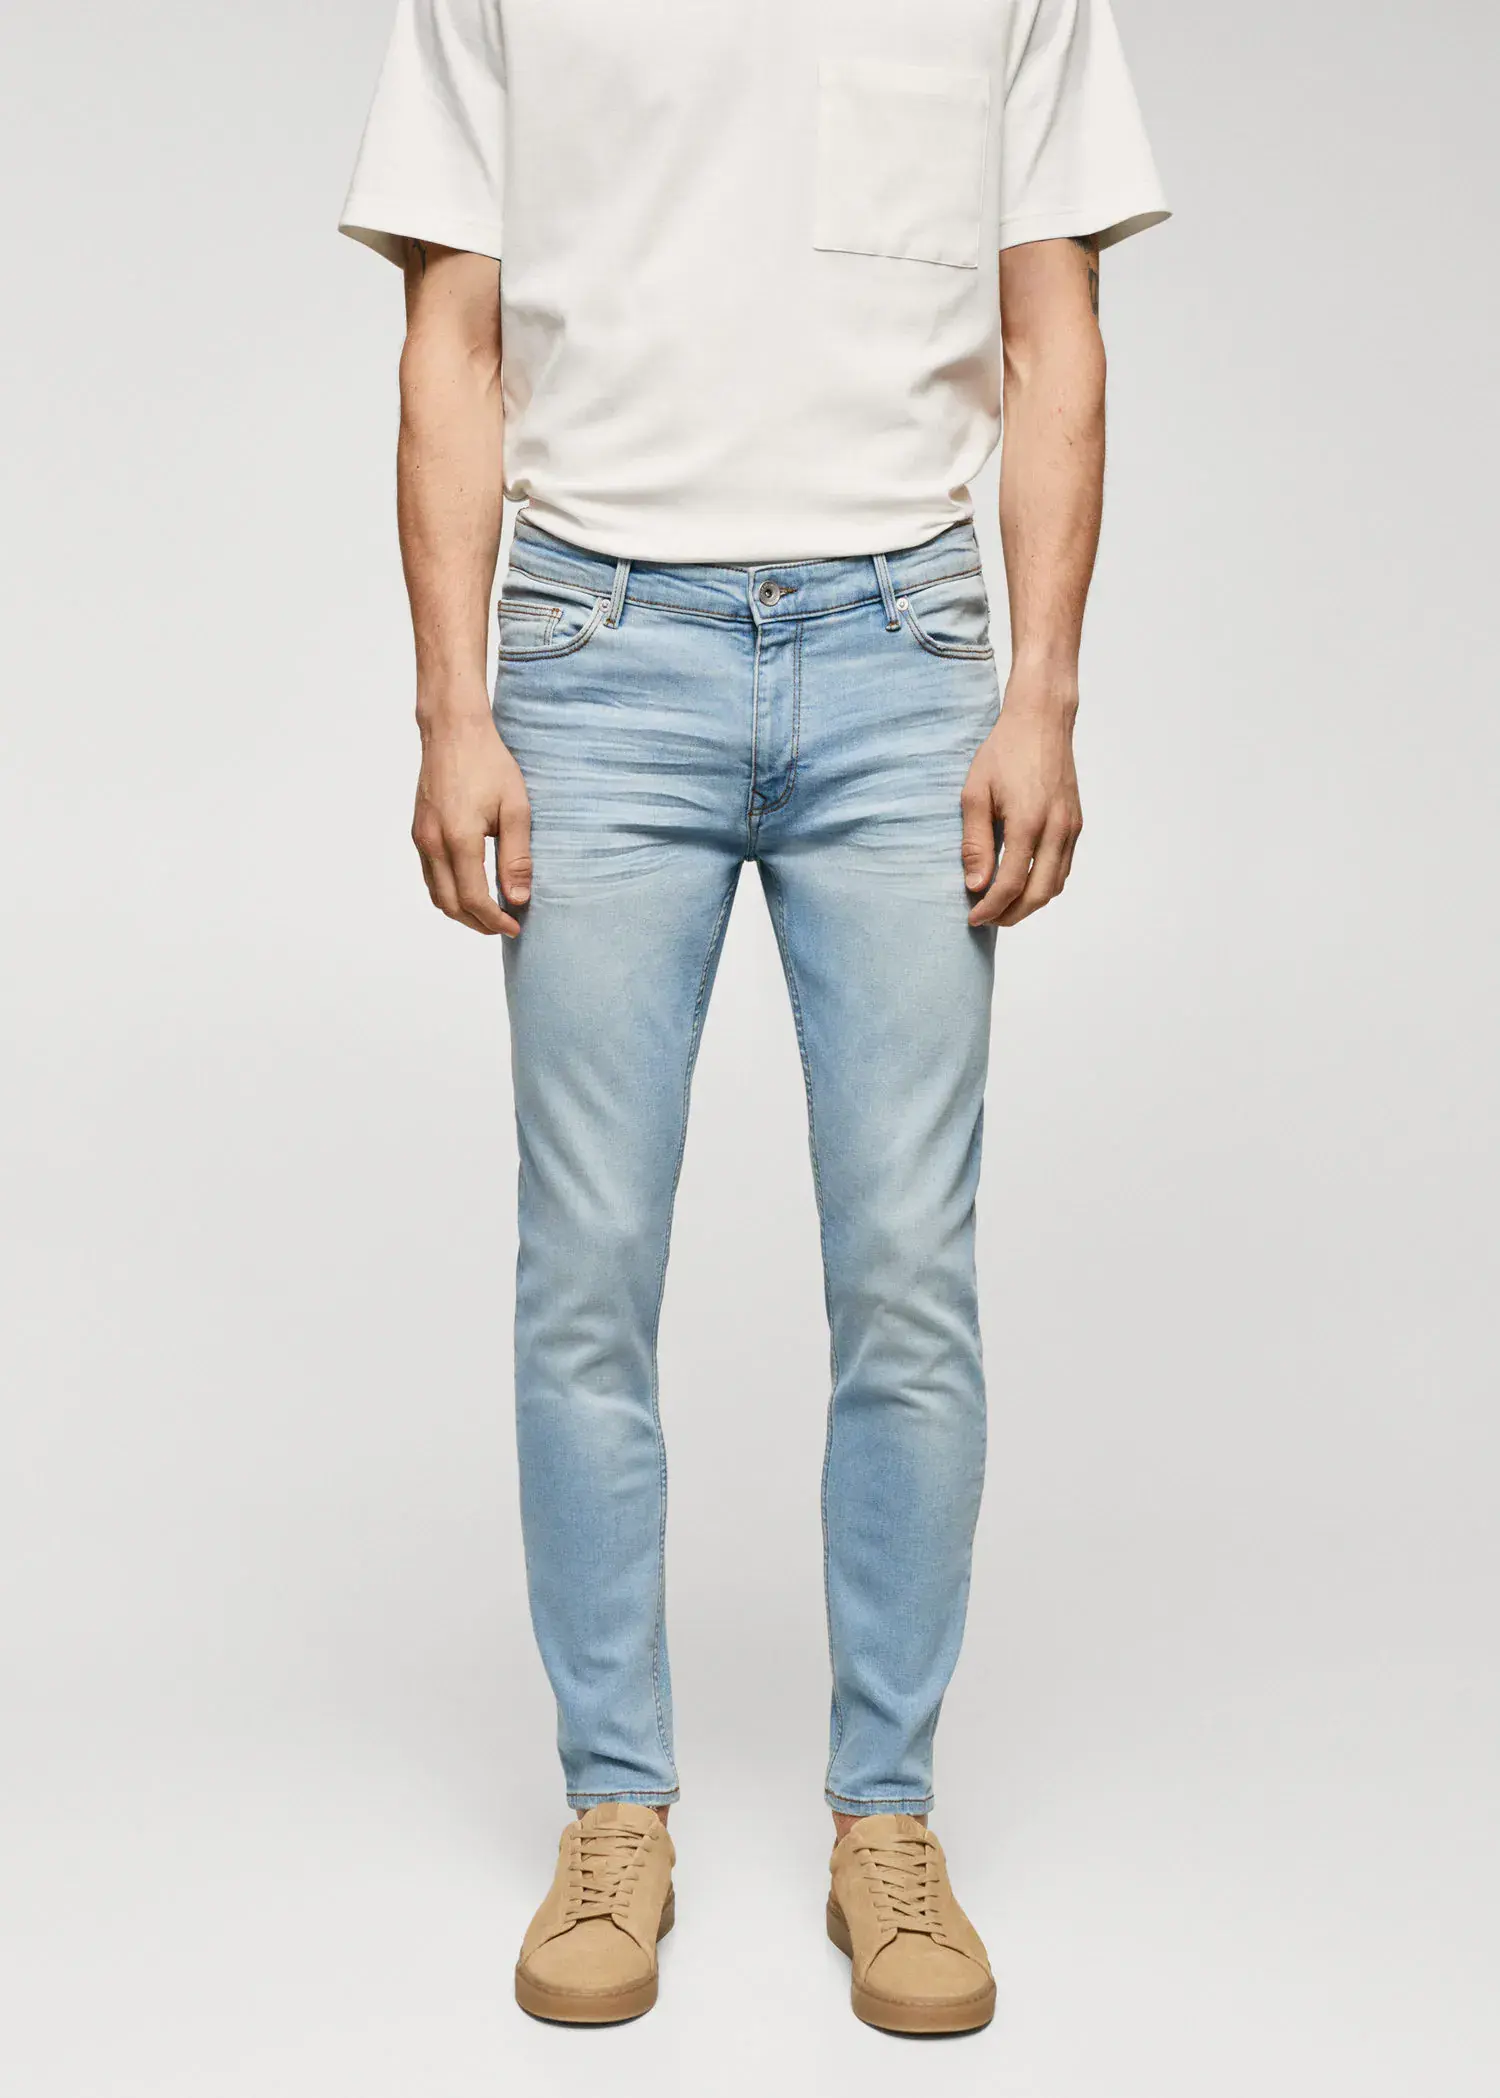 Mango Jude skinny-fit jeans. a man wearing light blue jeans and a white shirt. 